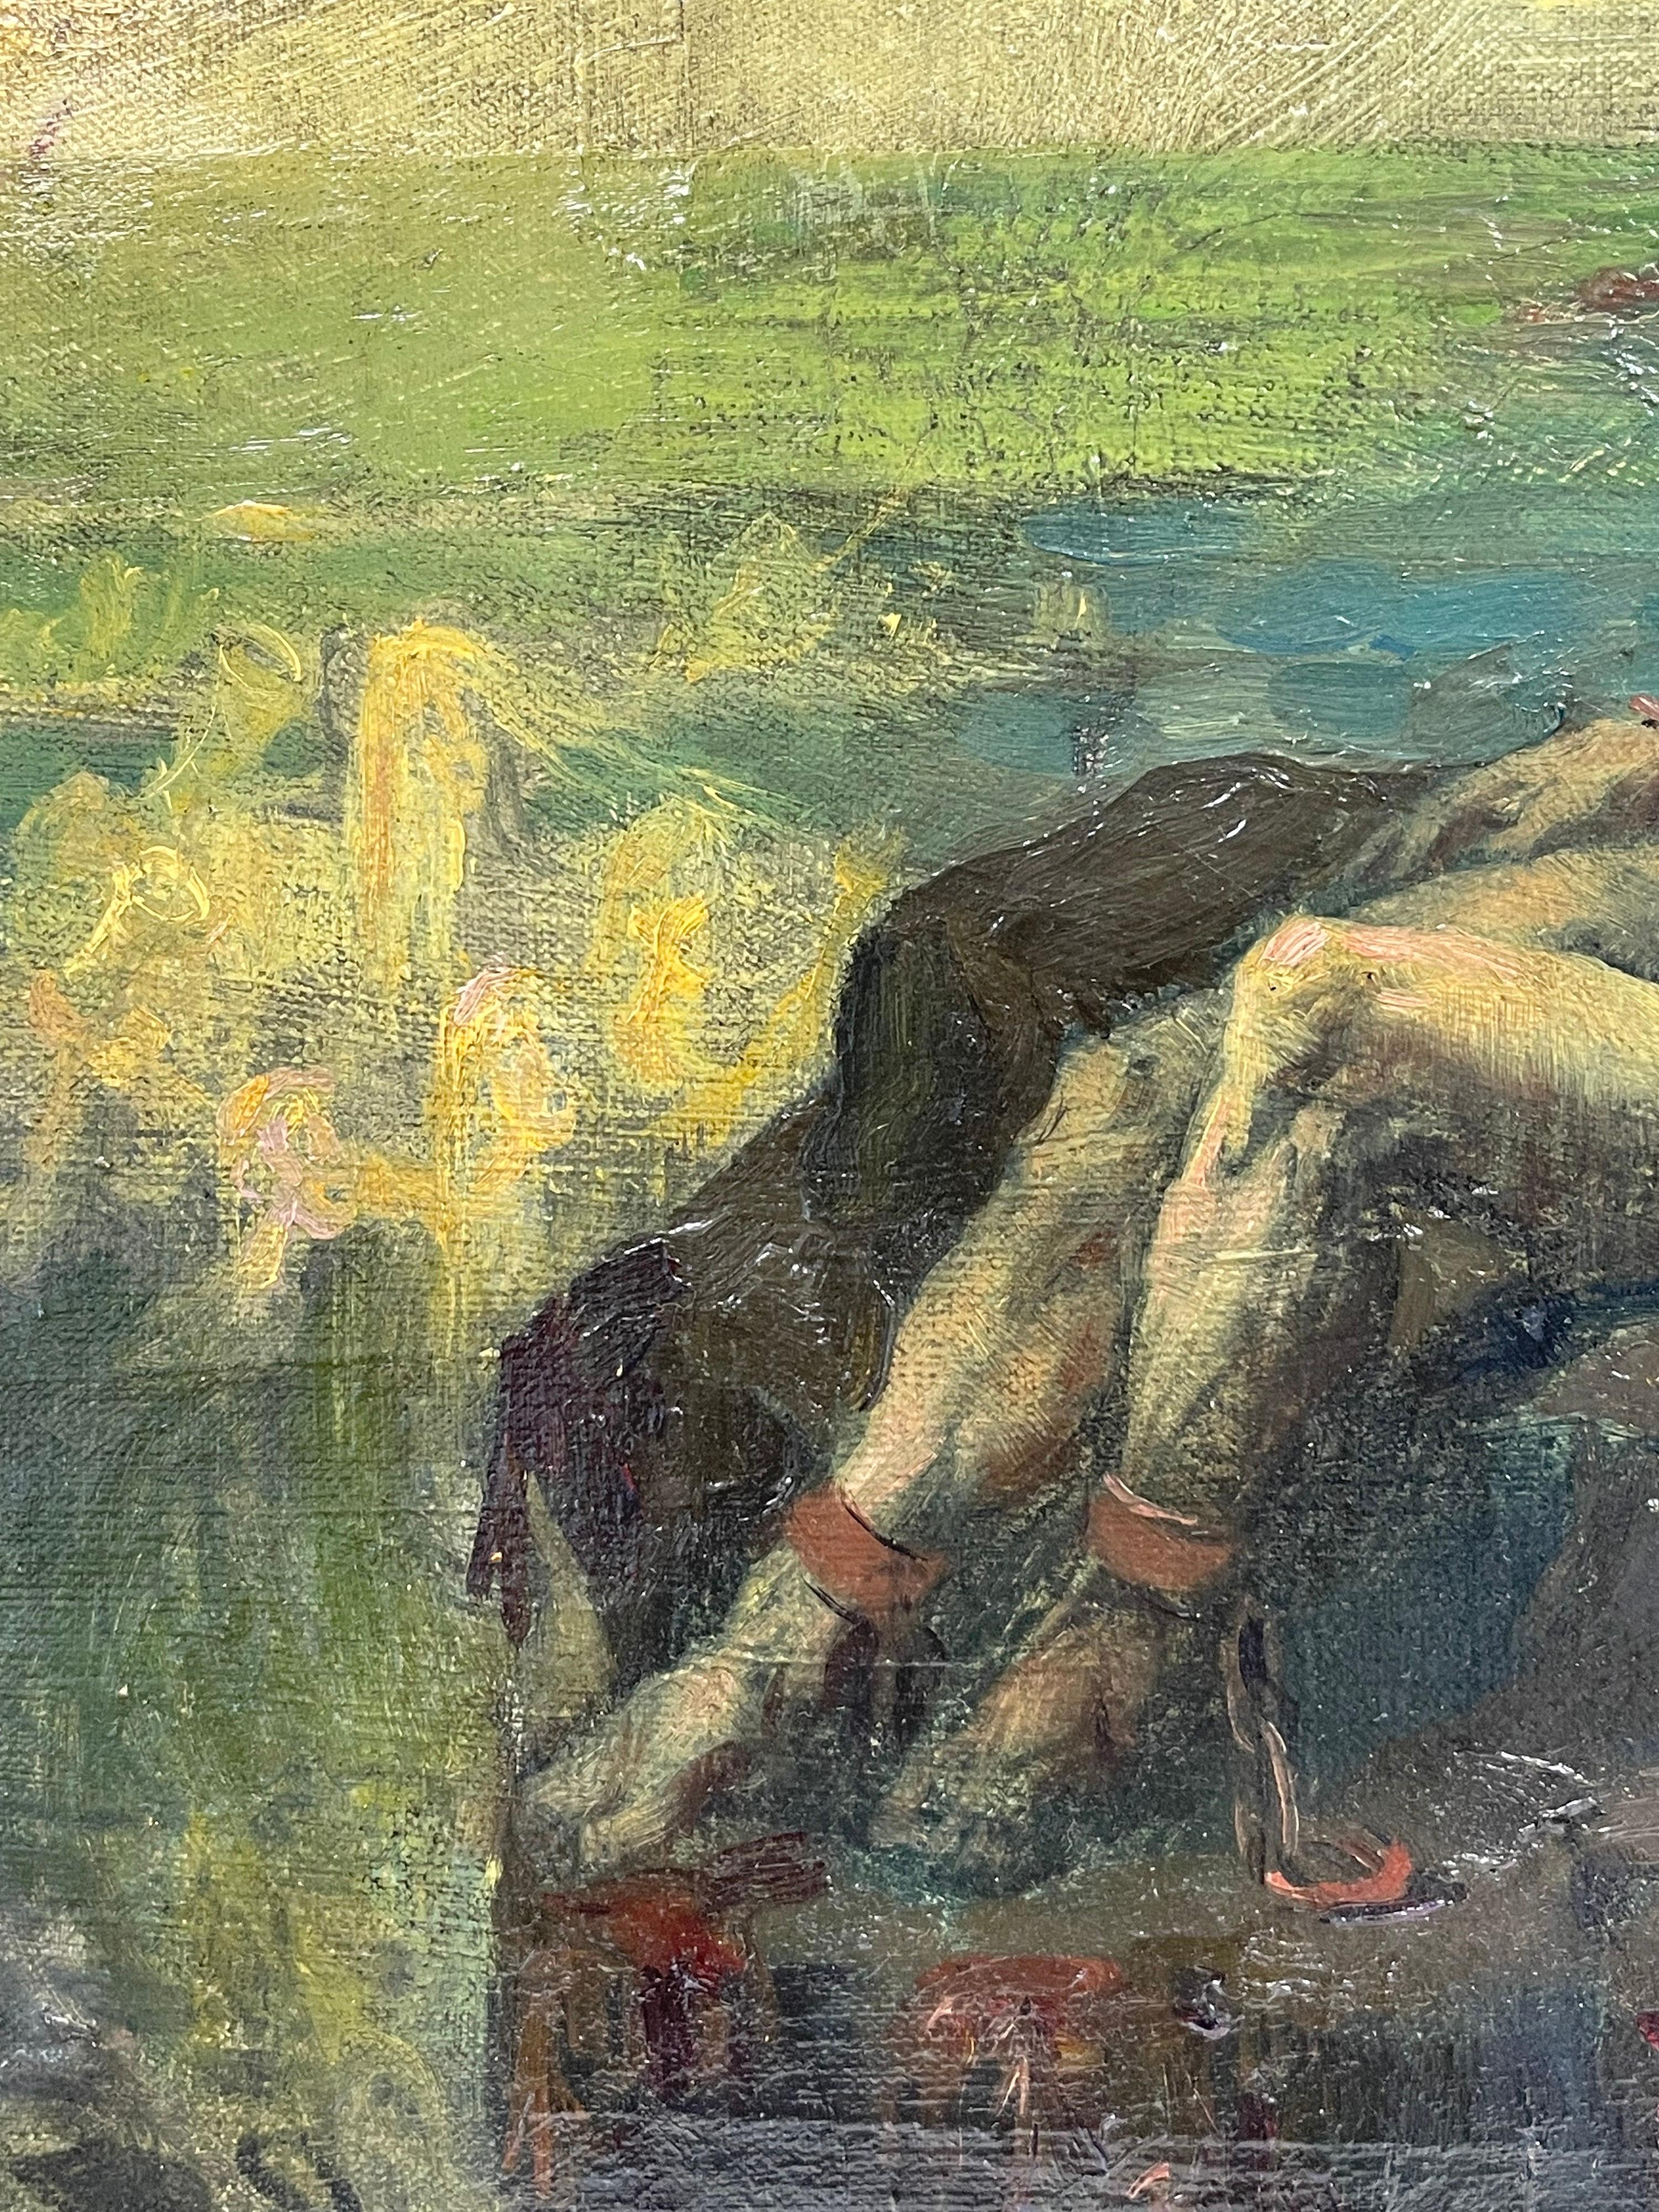 Prometheus chained to the Rocks
French School, signed and dated 1905
titled verso/ inscribed by the artist
oil painting on canvas, unframed
canvas measures 13 x 16 inches

condition: good, original and presentable. There are minor scuffs/ paint loss